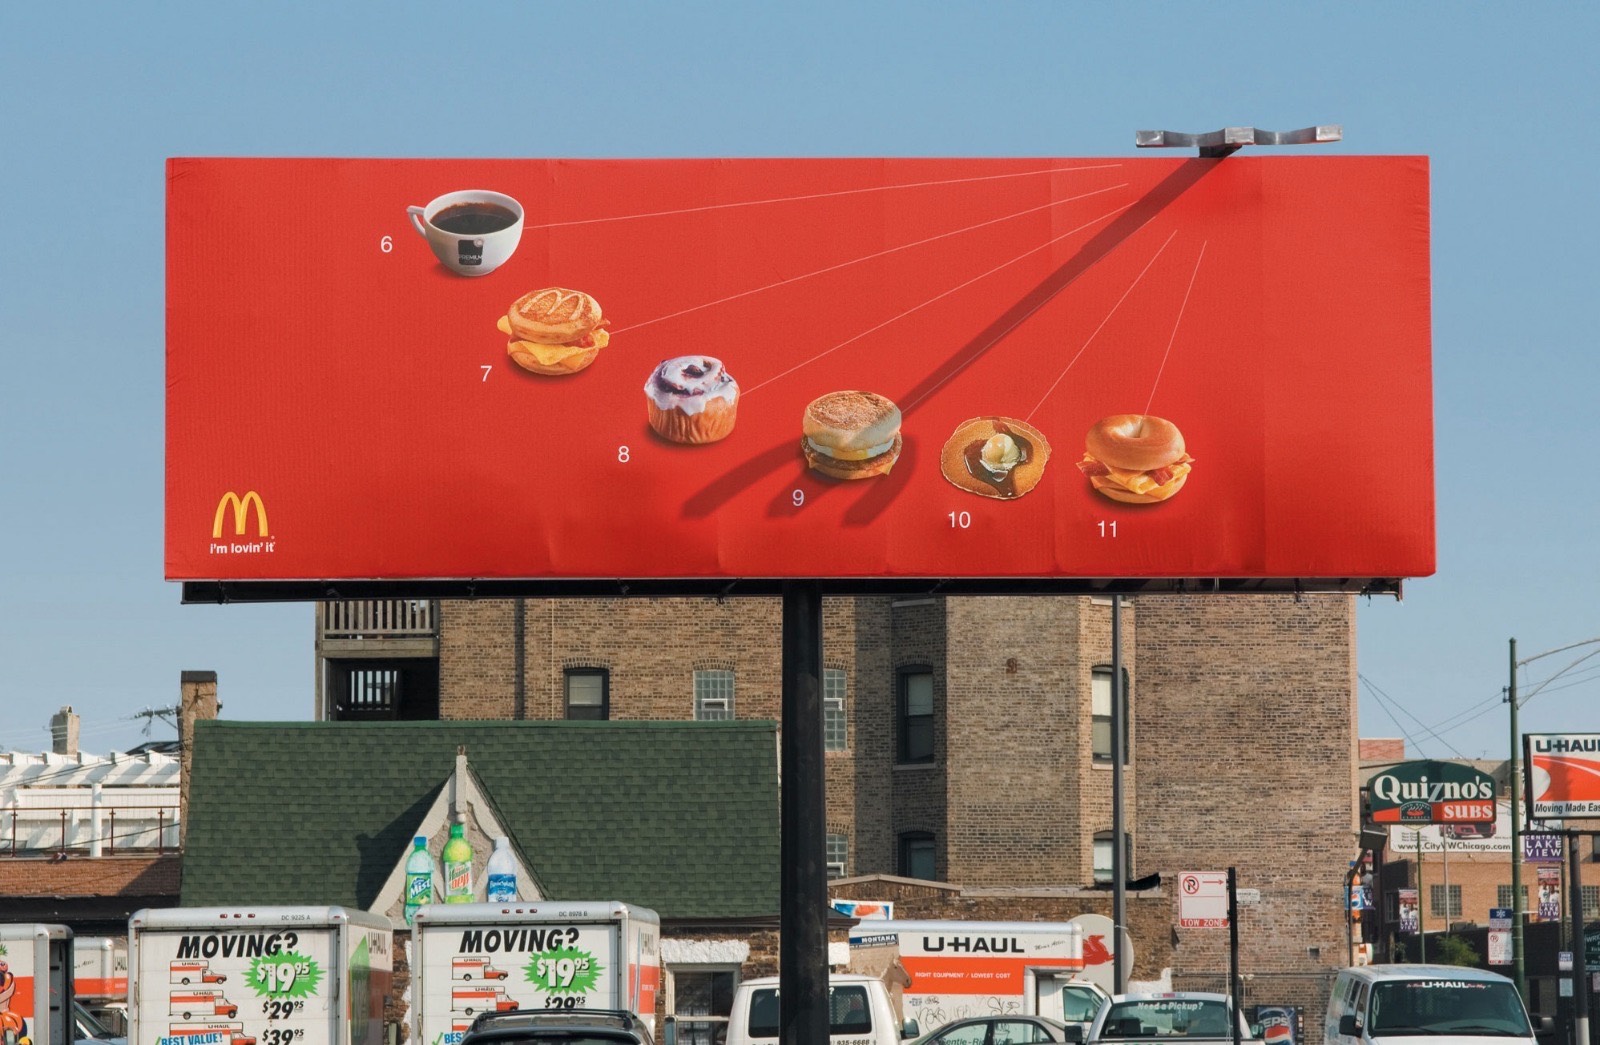 McDonald's Billboard Ad with Built-In Sundial pointing towards appropriate menu item